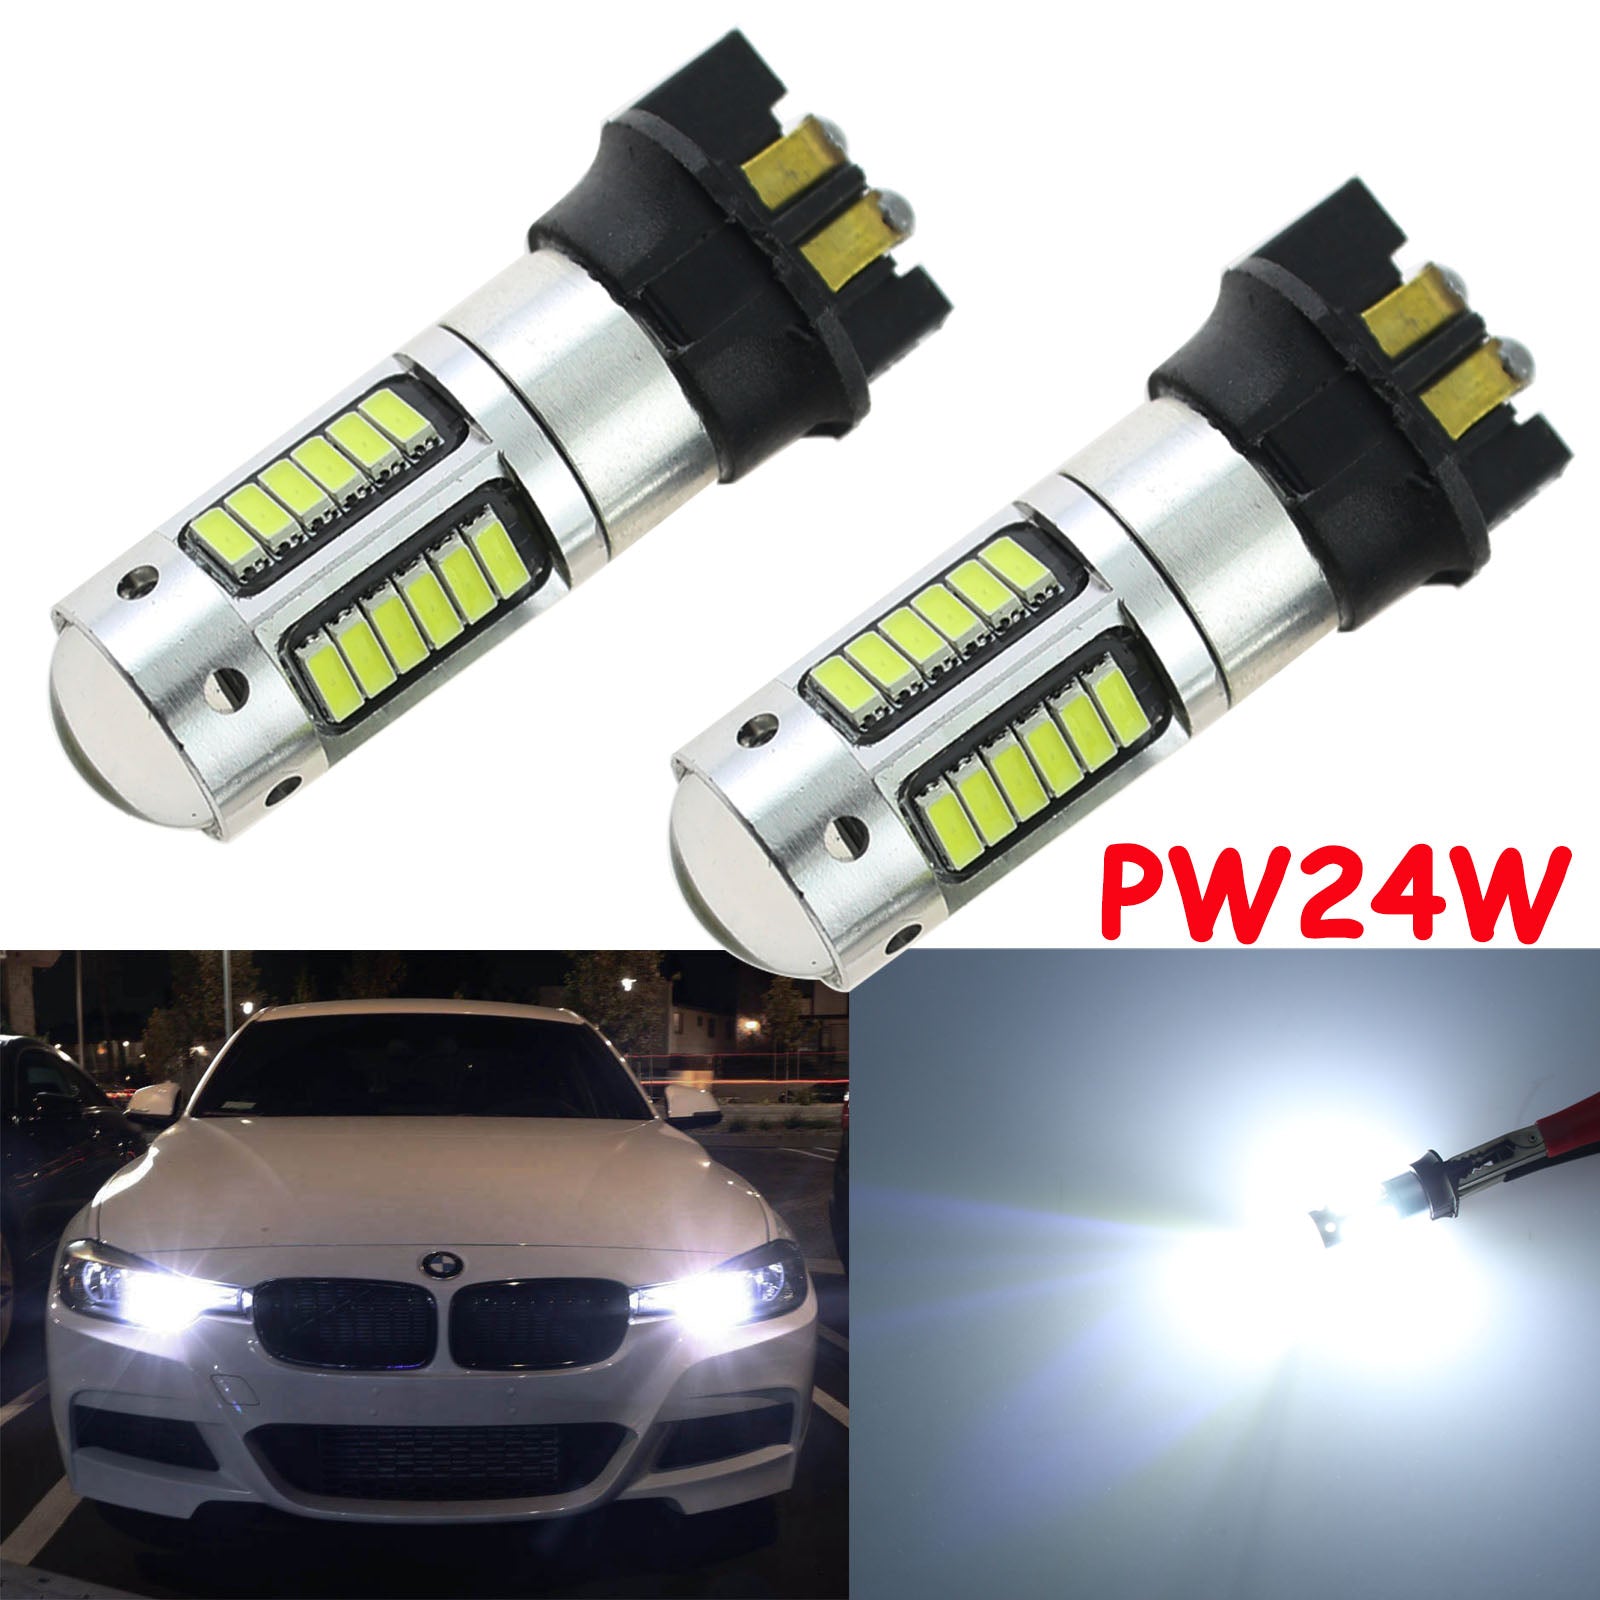 iJDMTOY (2) Xenon White Error Free PW24W LED Replacement Bulbs Compatible  With Volkswagen: MK7 Golf GTI; BMW: F30 3-Series 320i 328i 335i Daytime